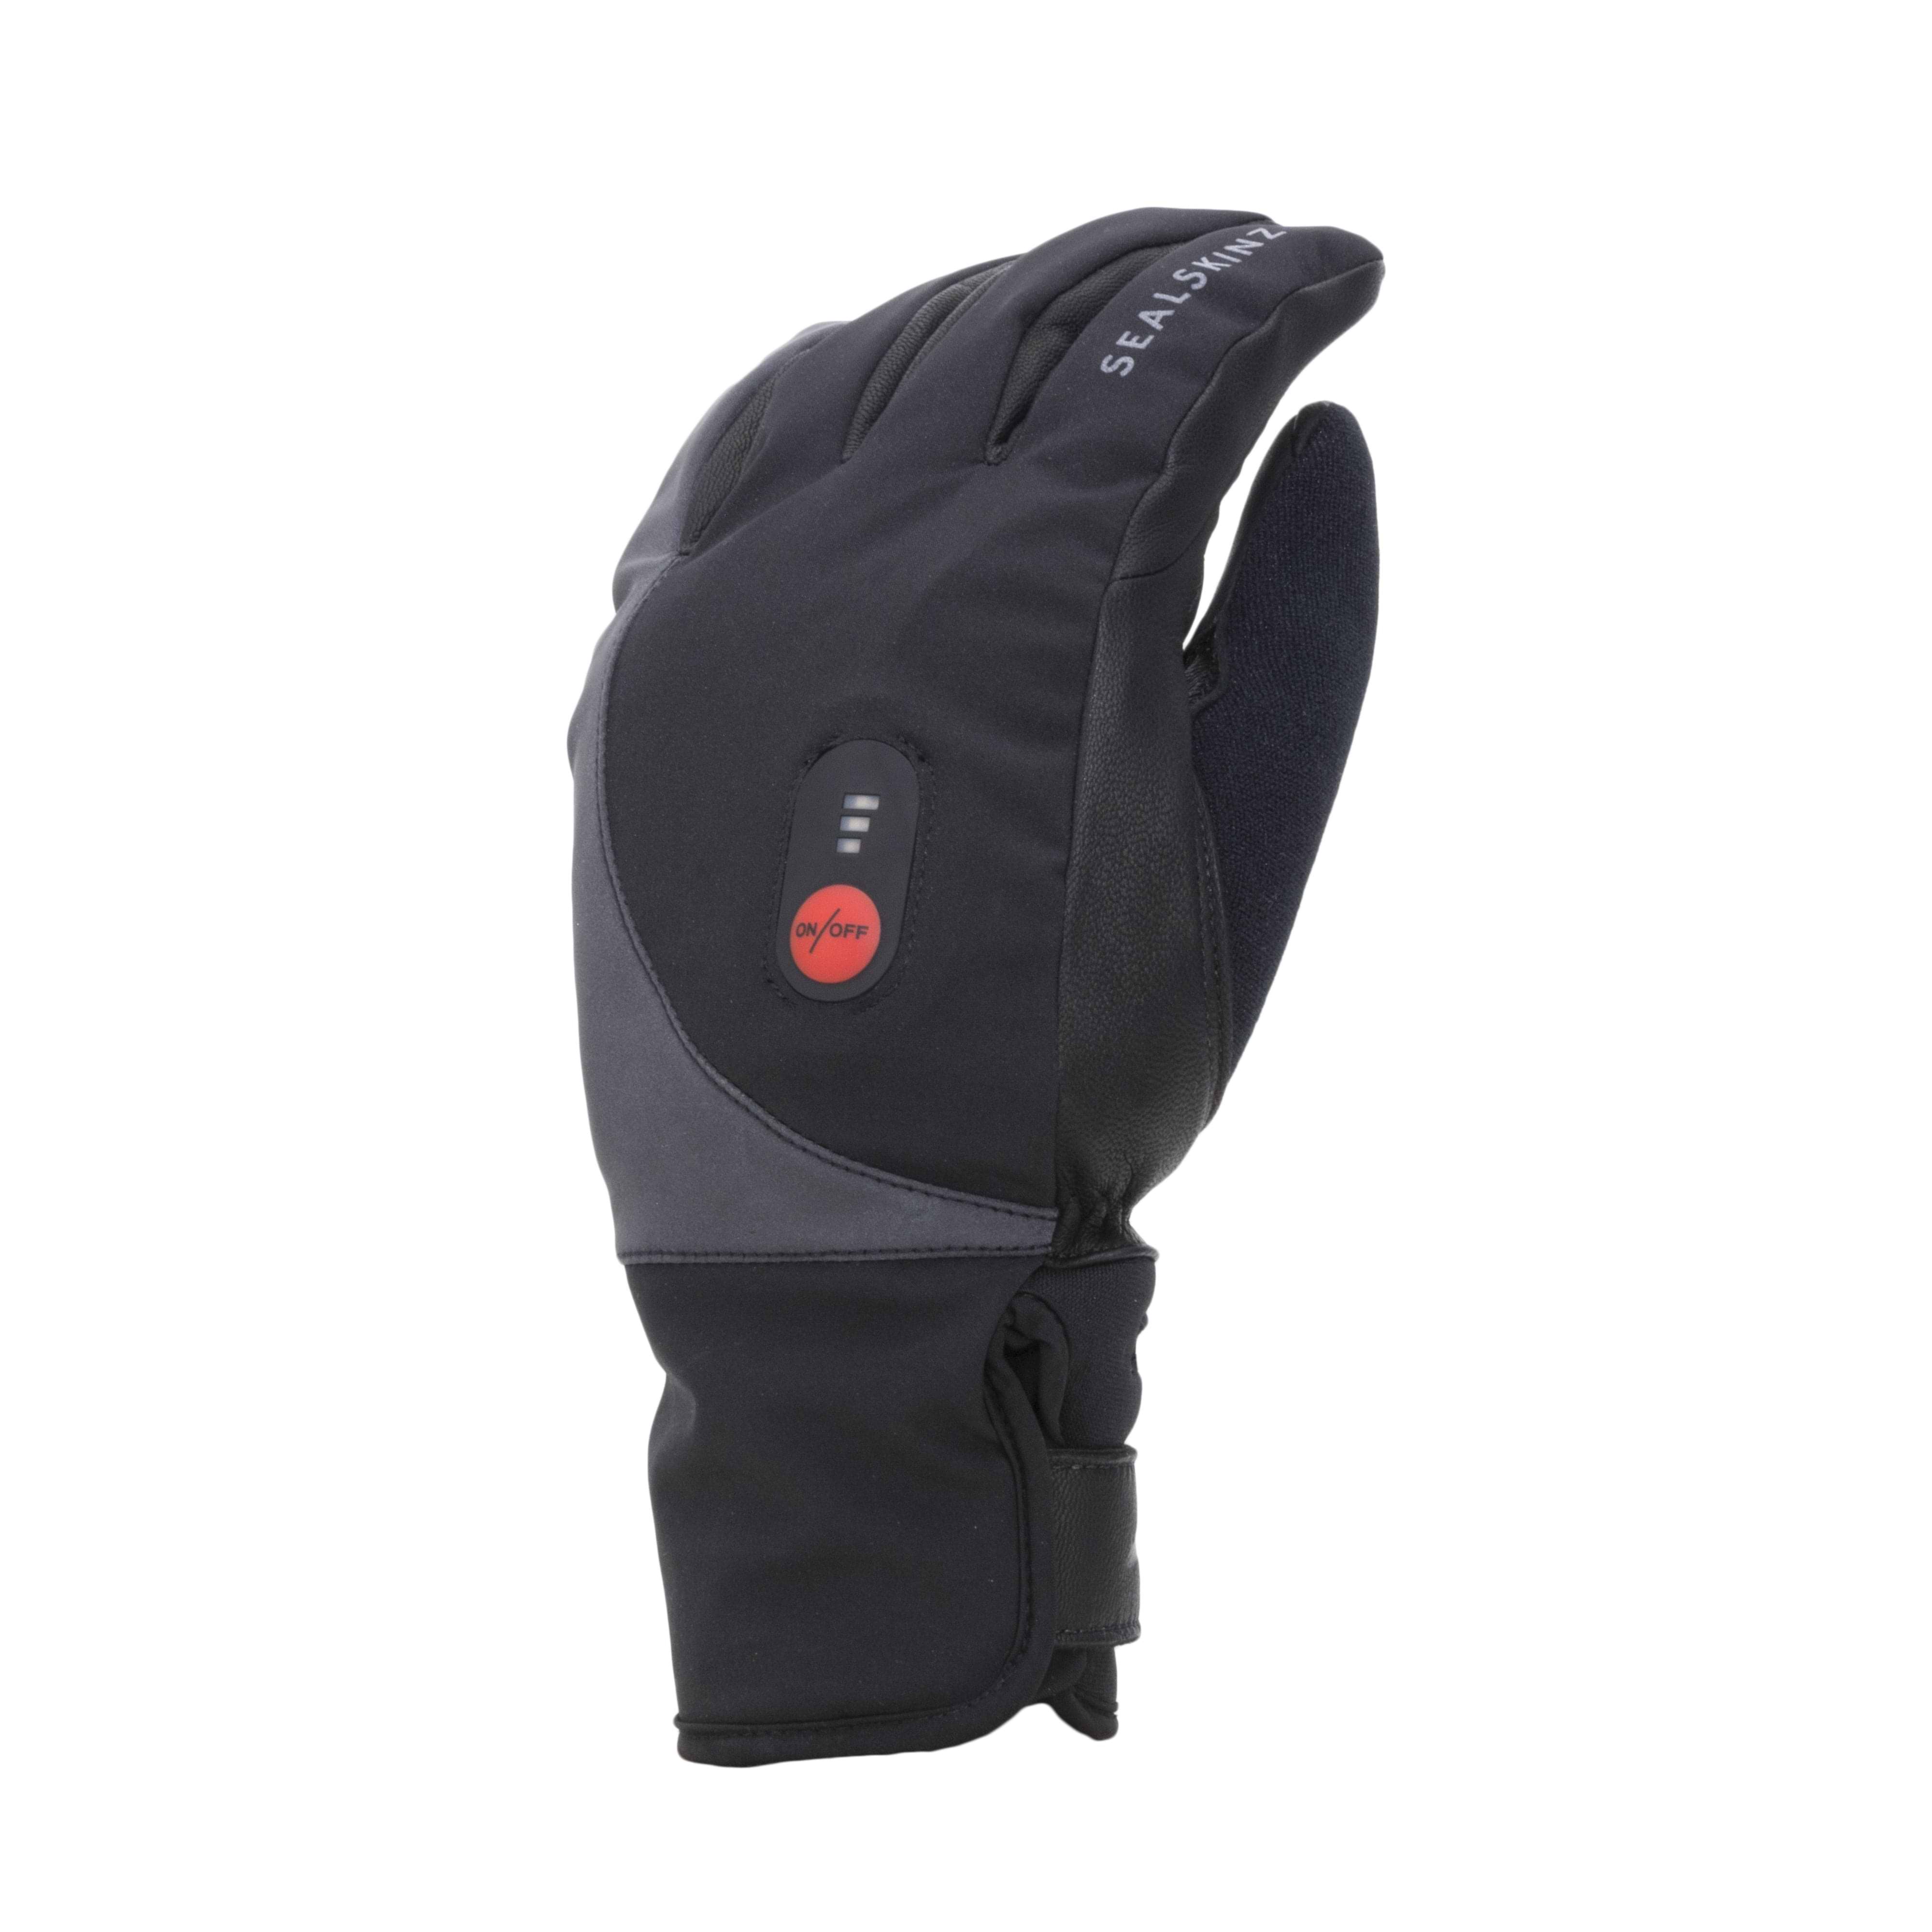 Heated Gloves for Winter Cycling - Volt Heat